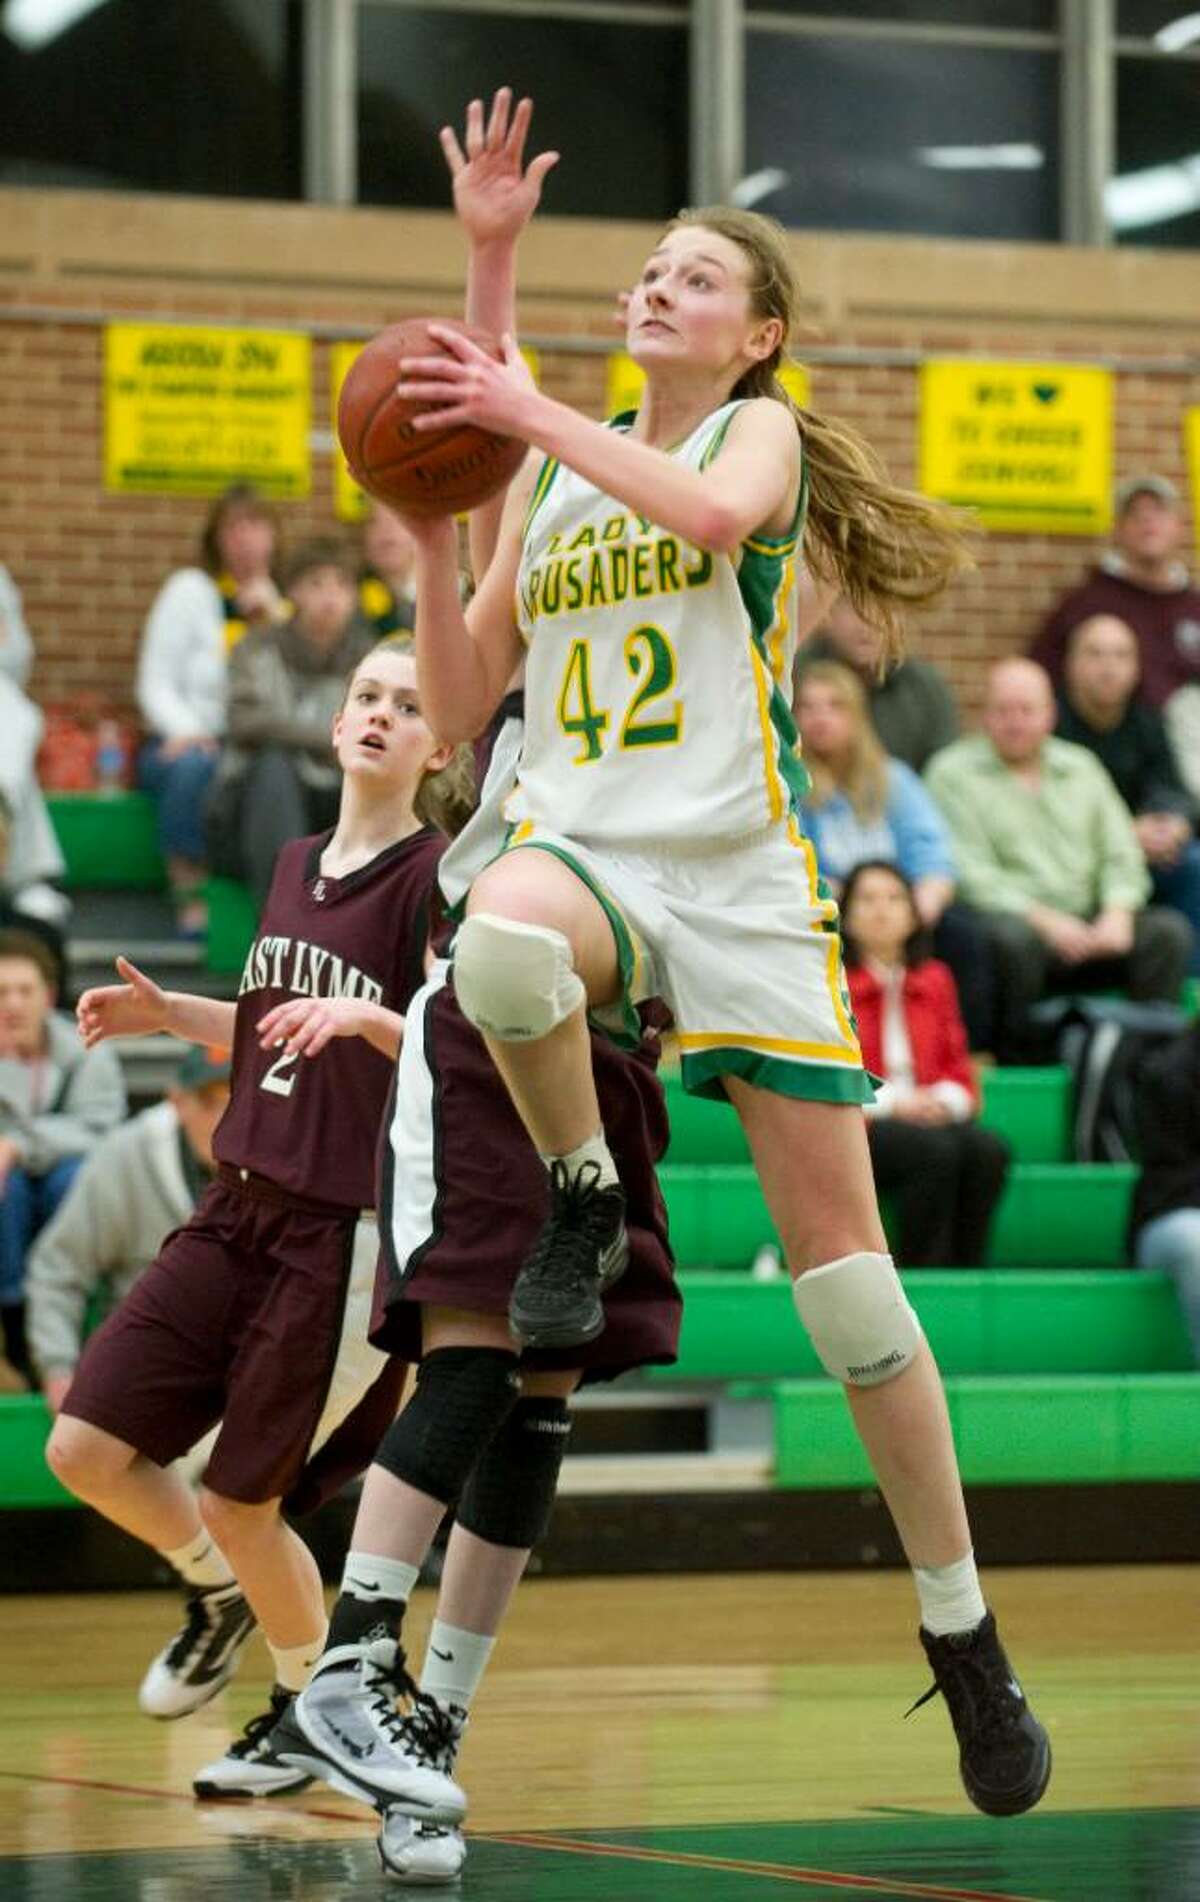 Trinity's Mackenzie Griffin shoots during the the first round of the 2010 CIAC Class L girls basketball tournament at Trinity Catholic High School in Stamford, Conn. on Monday, March 1, 2010.